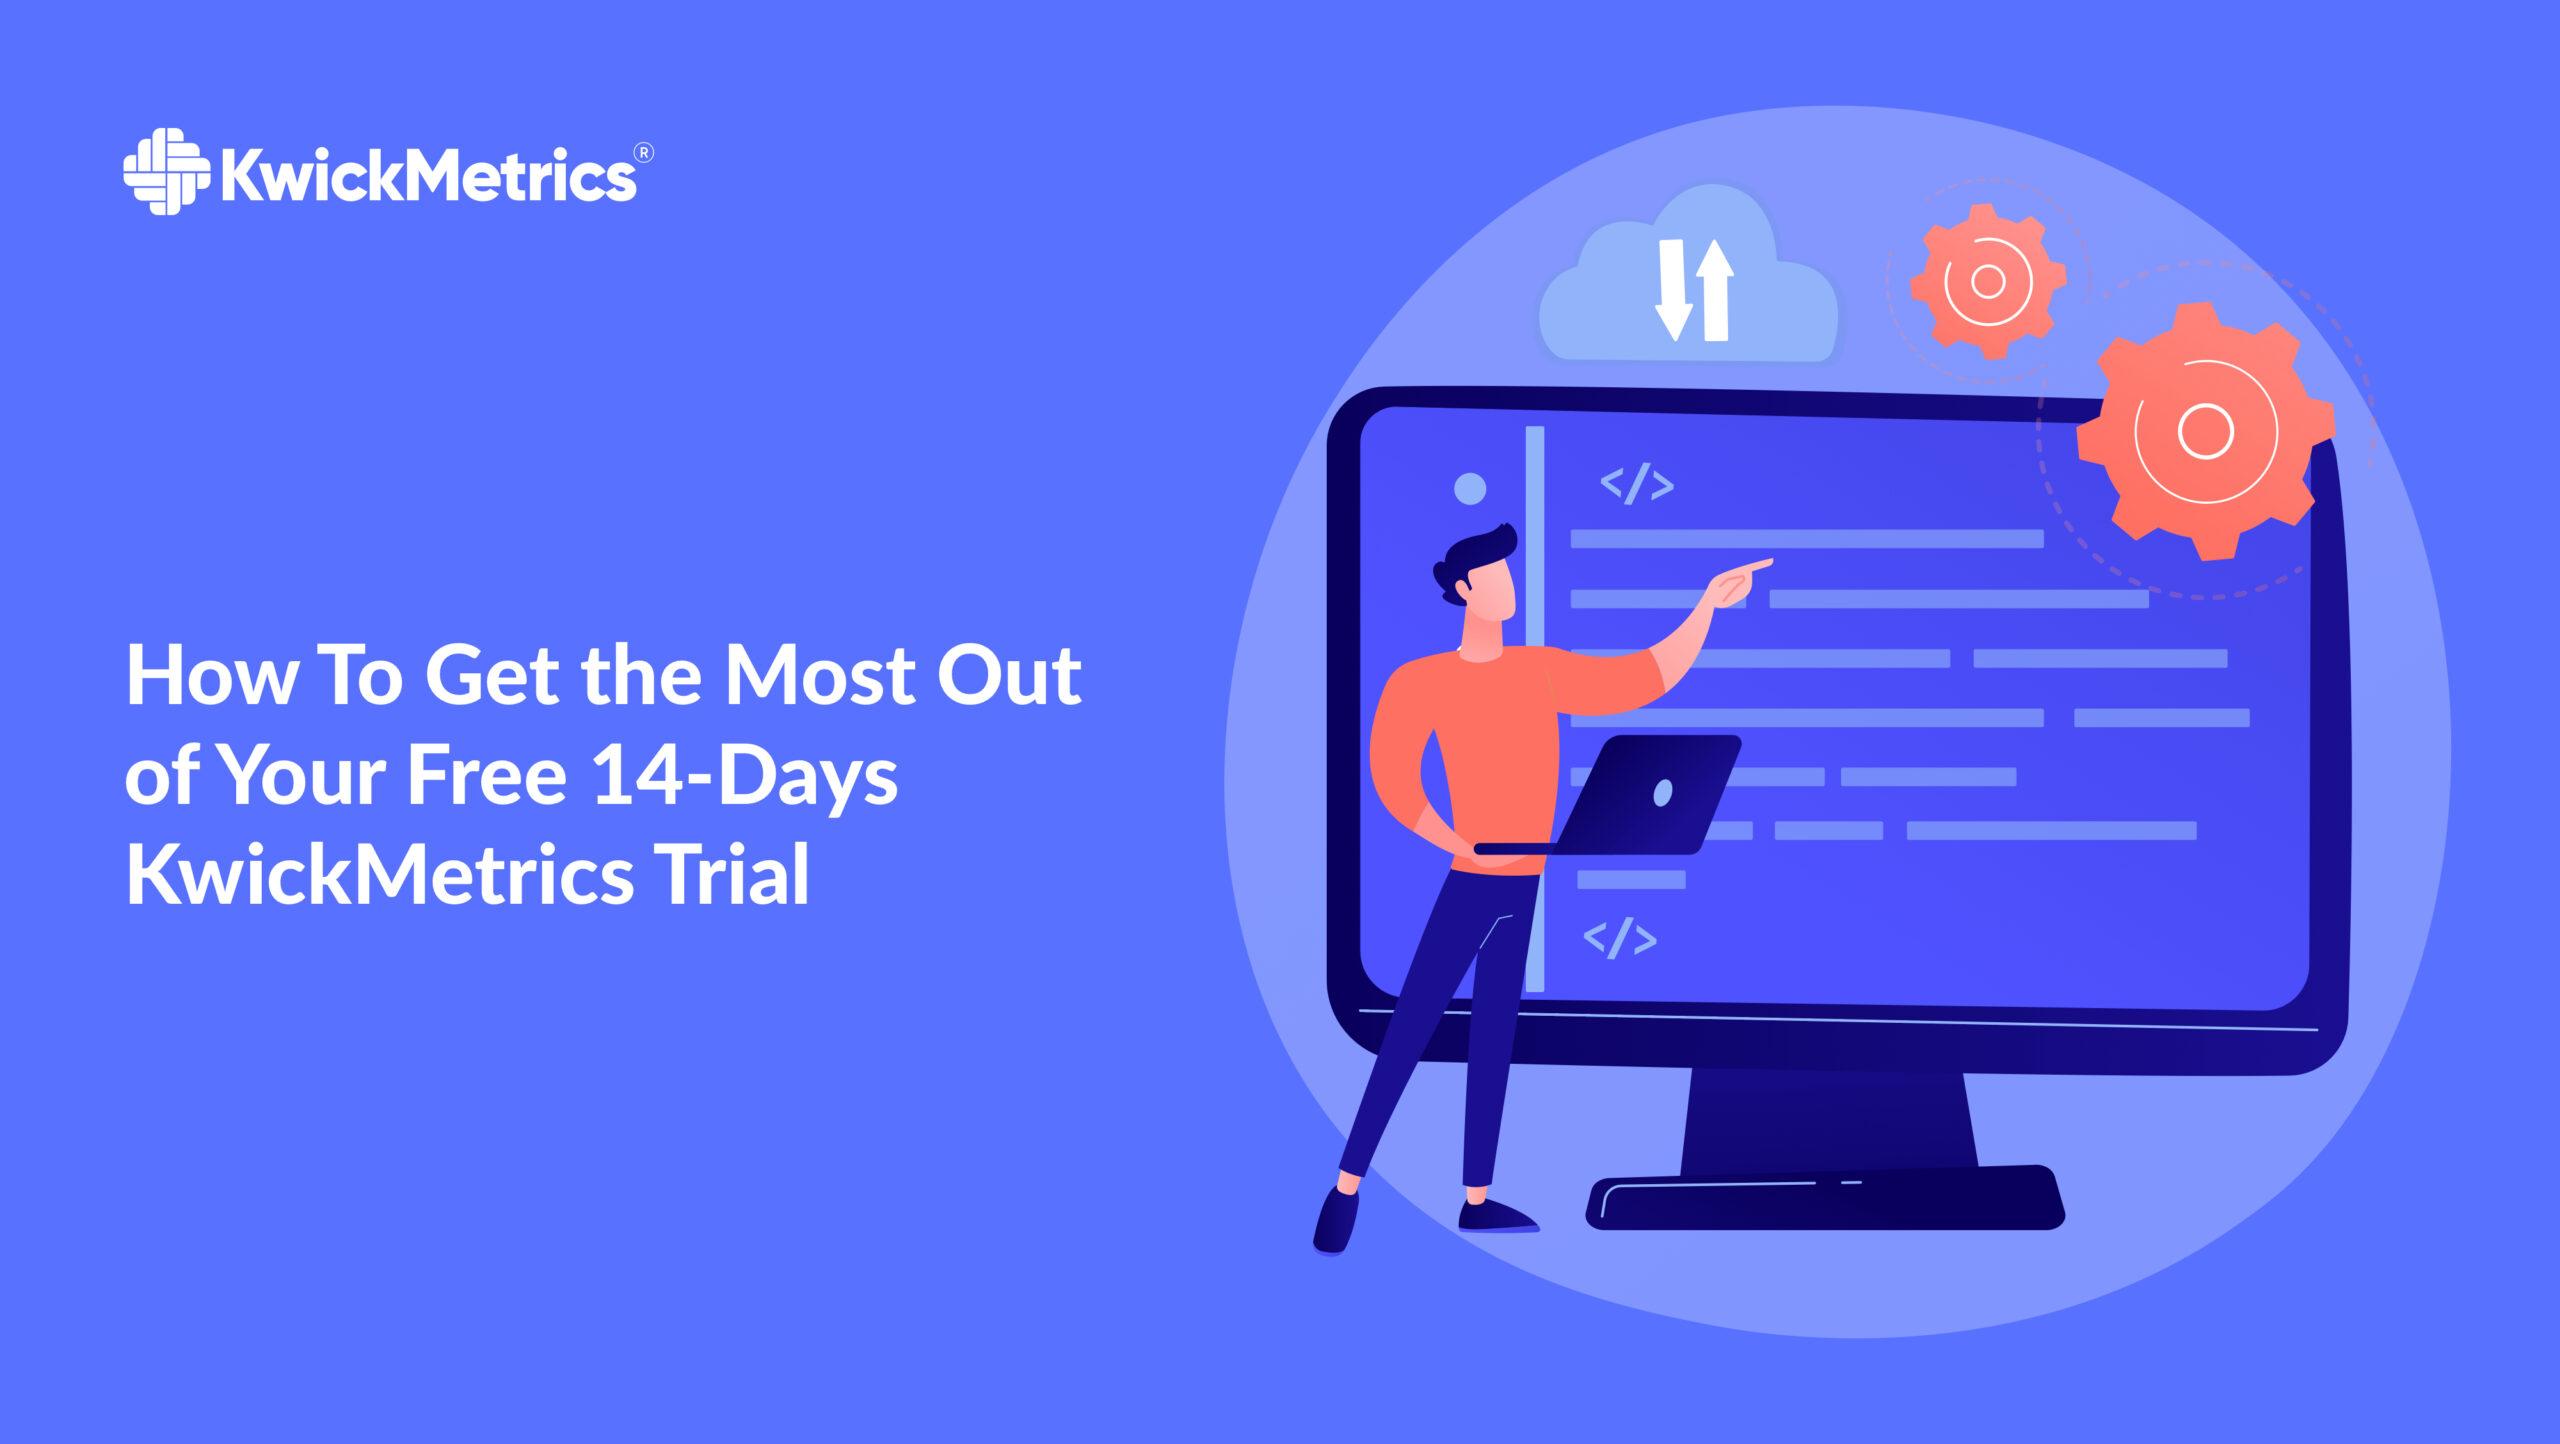 How to get the most out of 14-Day Free Trial